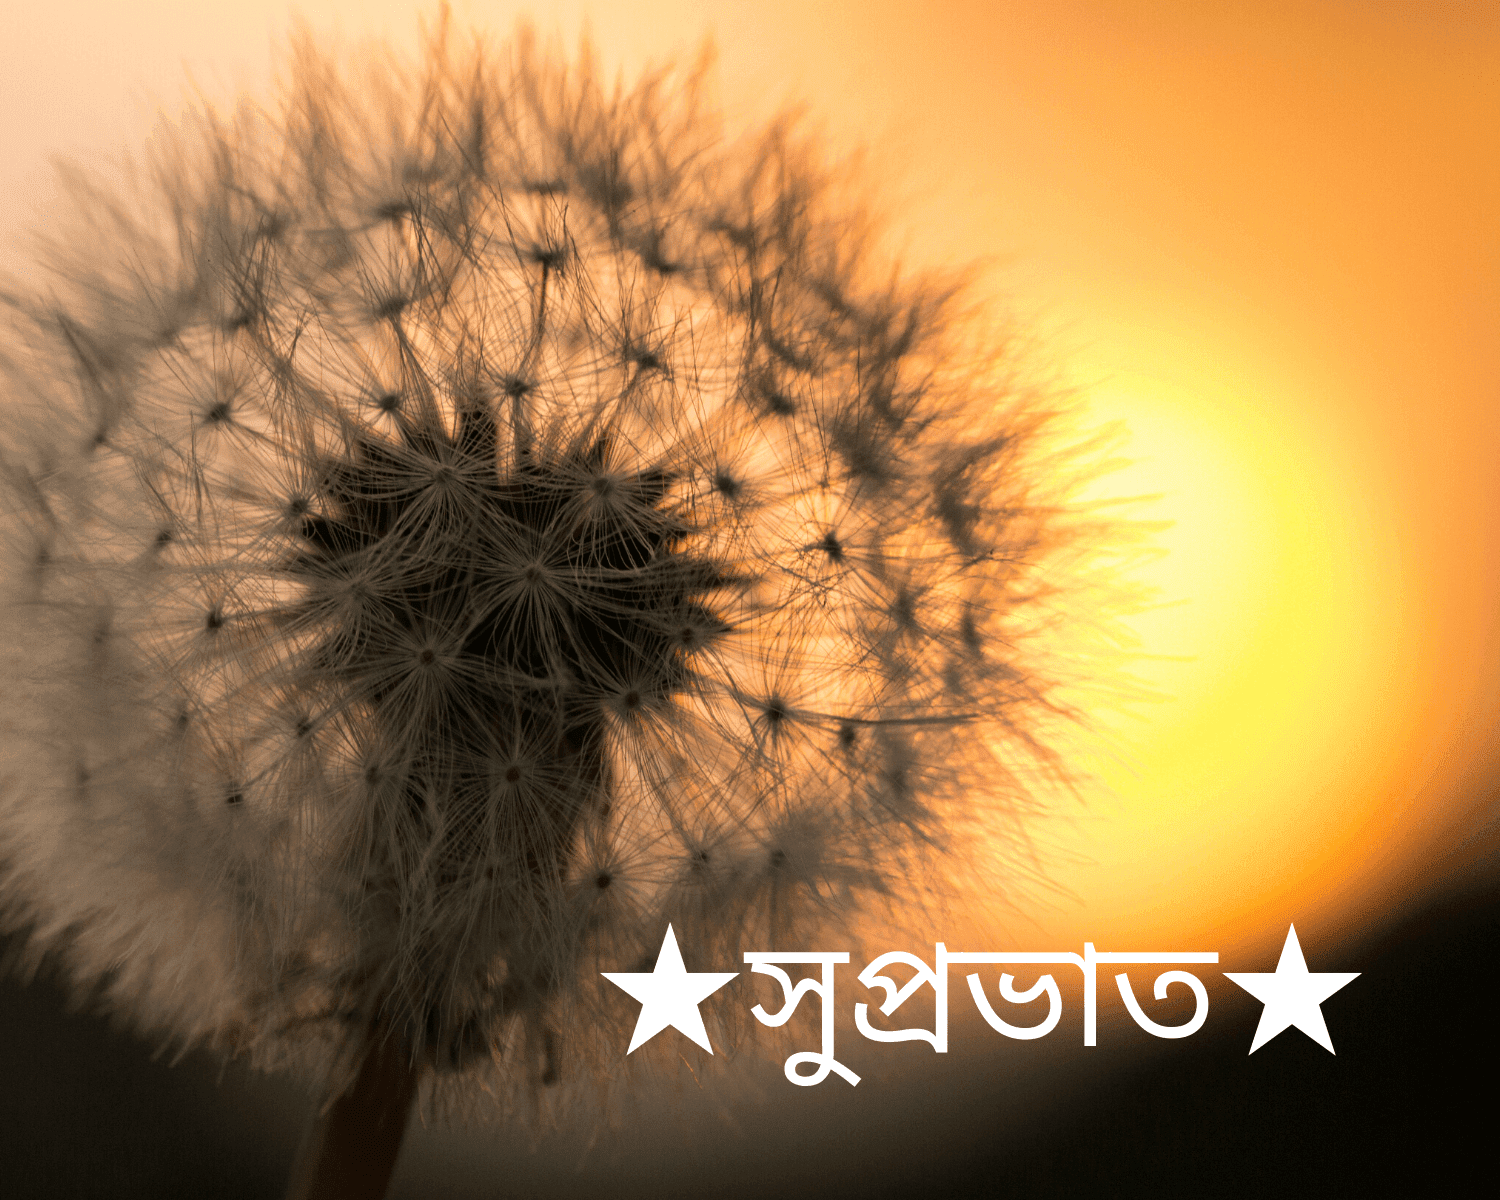 Bengali Good Morning Images For Whatsapp/facebook - World Mission Sunday 2019 - HD Wallpaper 